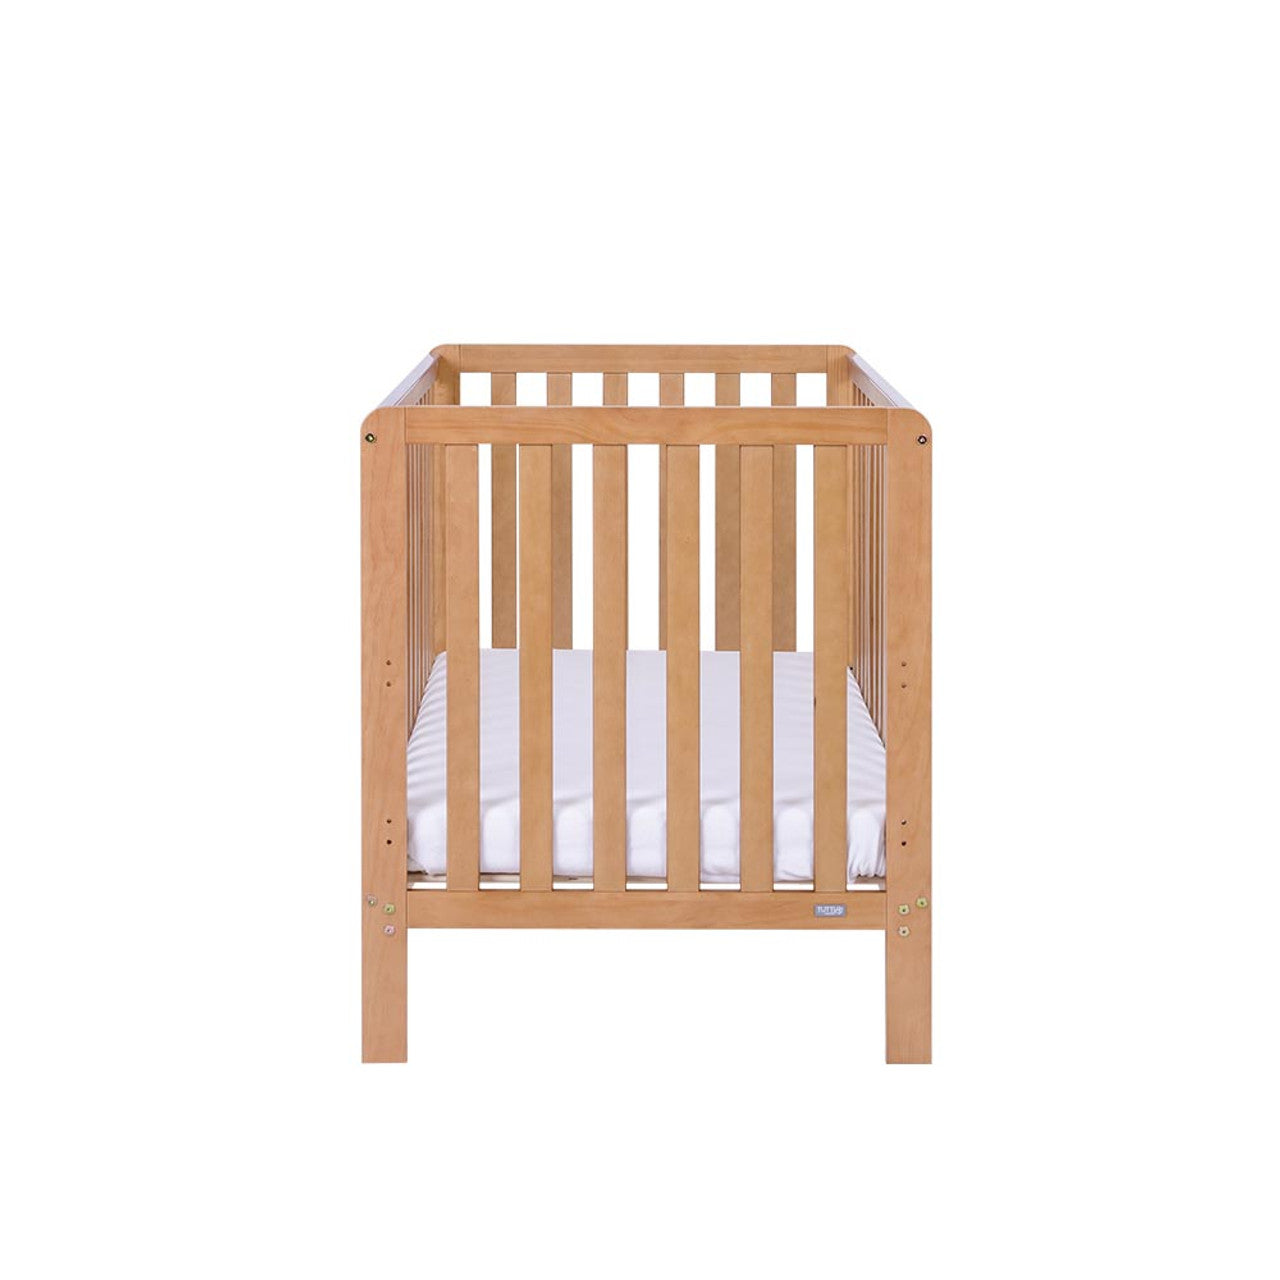 Tutti Bambini Malmo Cot Bed with Rio 2 Piece Room Set - Oak / Dove Grey -  | For Your Little One